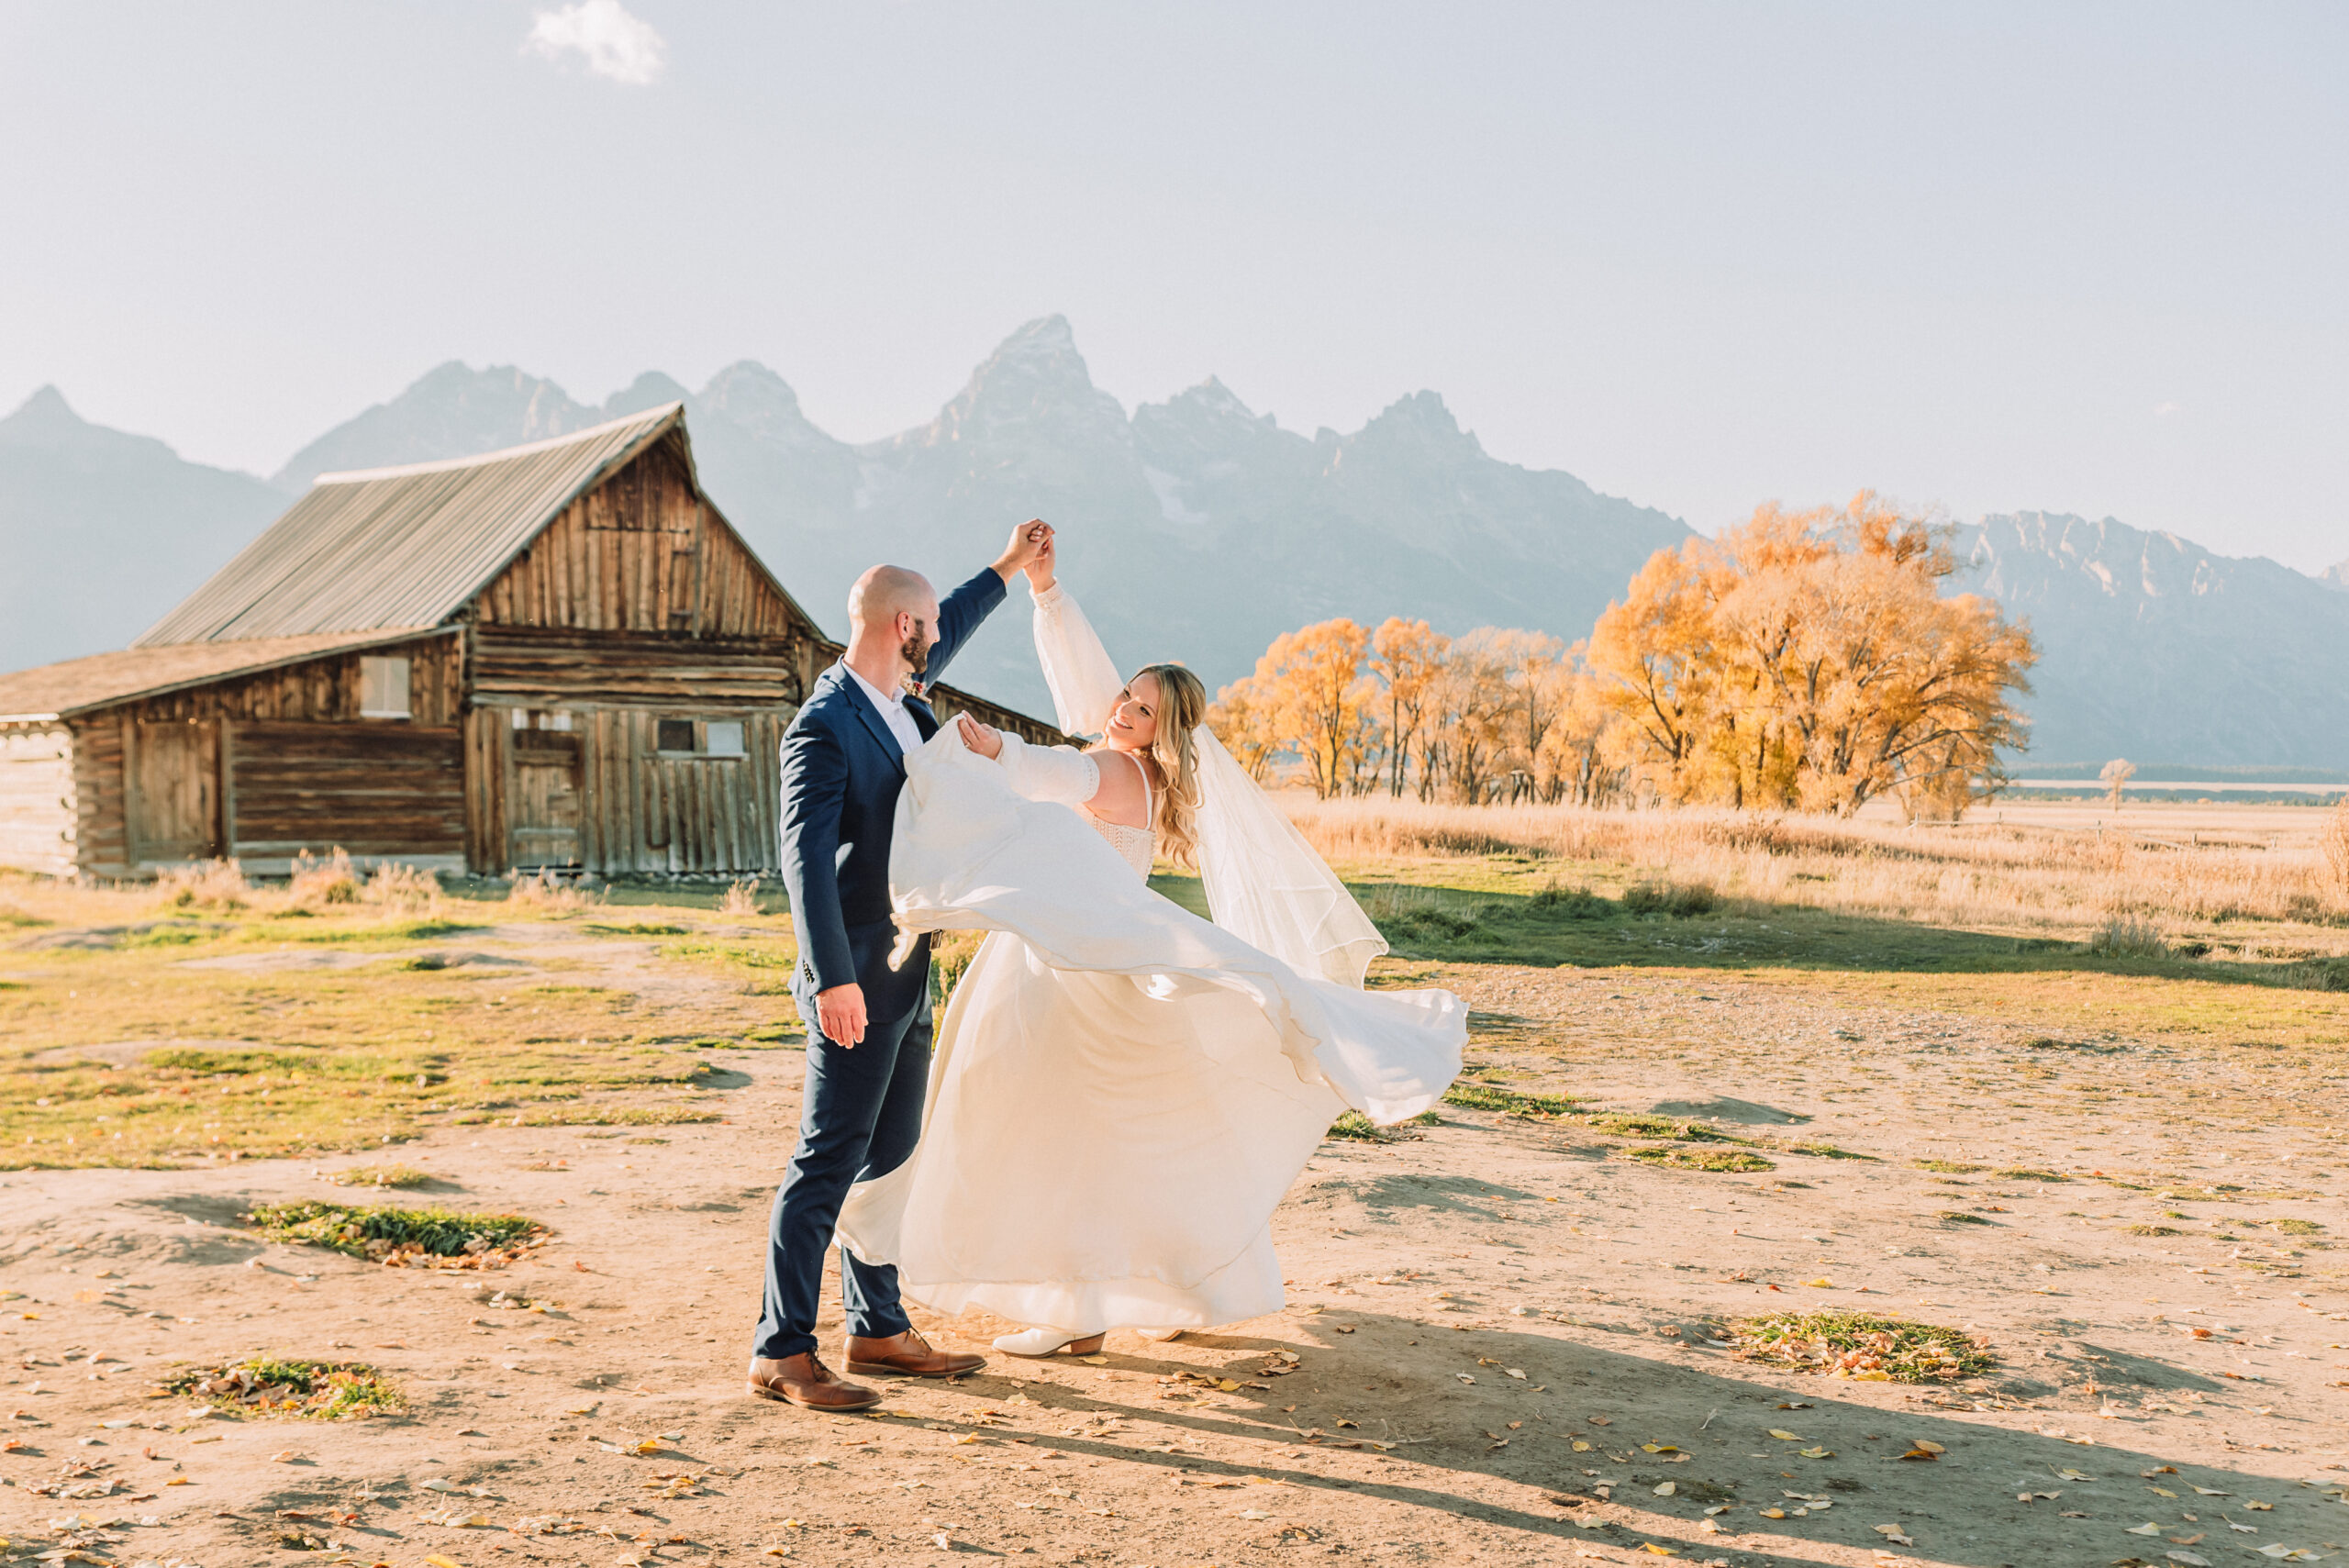 How to elope in Jackson Hole, Elopement photography packages